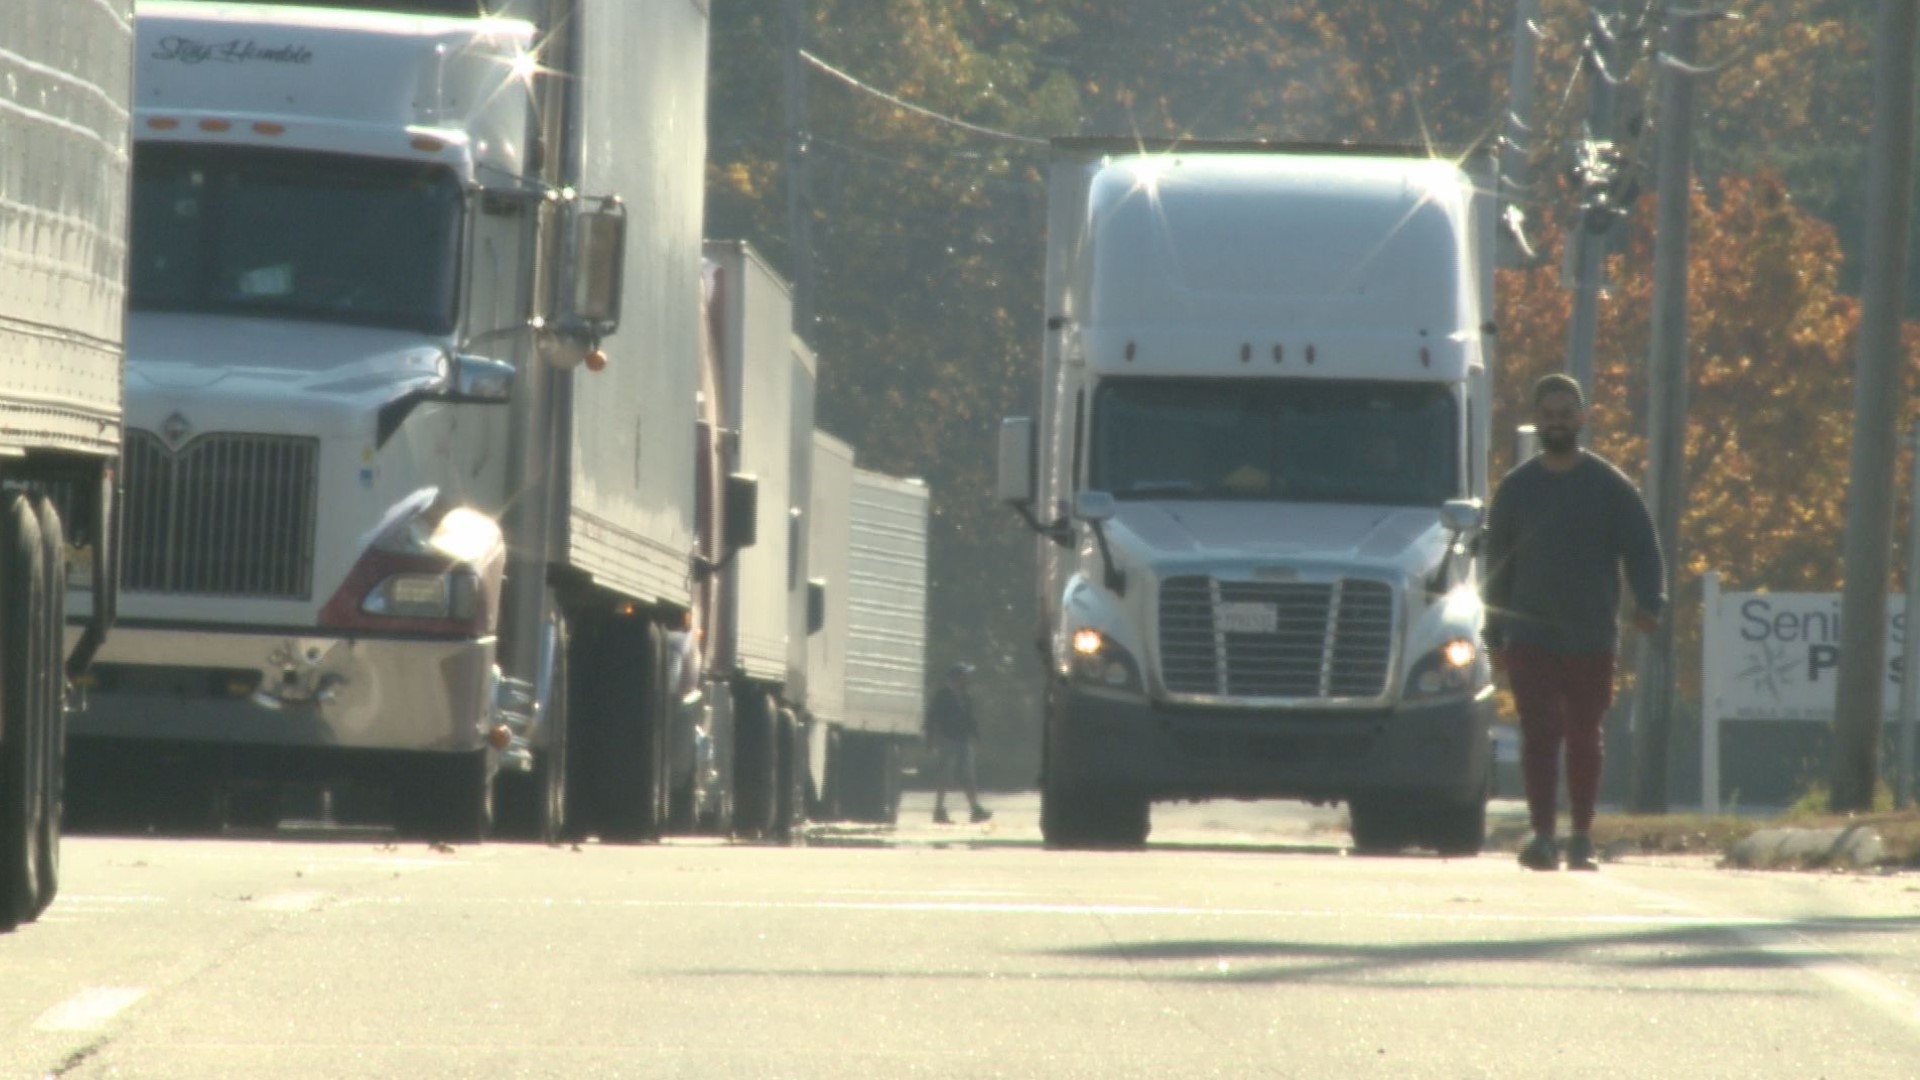 The tractor-trailers are lined up outside waiting to deliver their goods. There's a shelter-in-place order due to the search for the Lewiston mass shooting suspect.